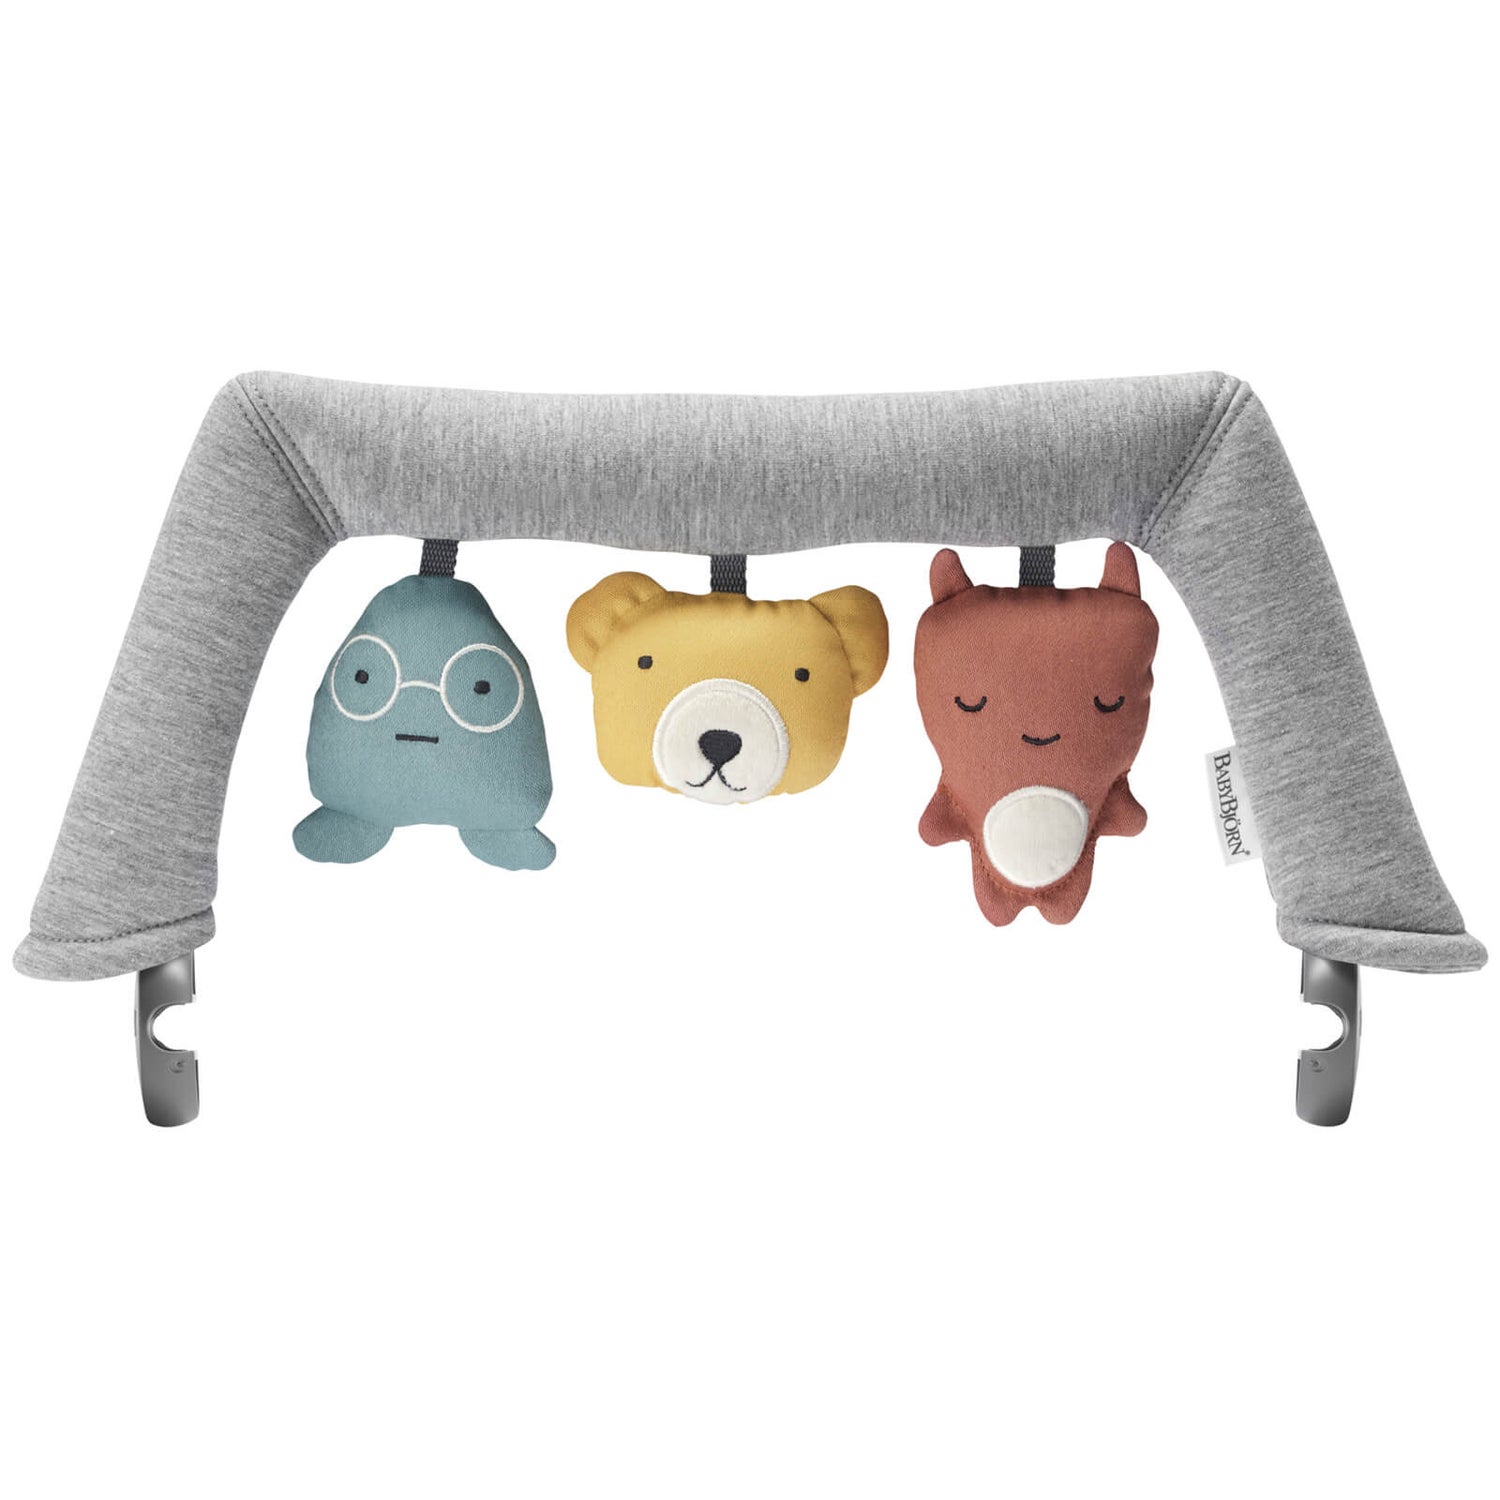 BABYBJÖRN Toy for Bouncers - Soft Friends